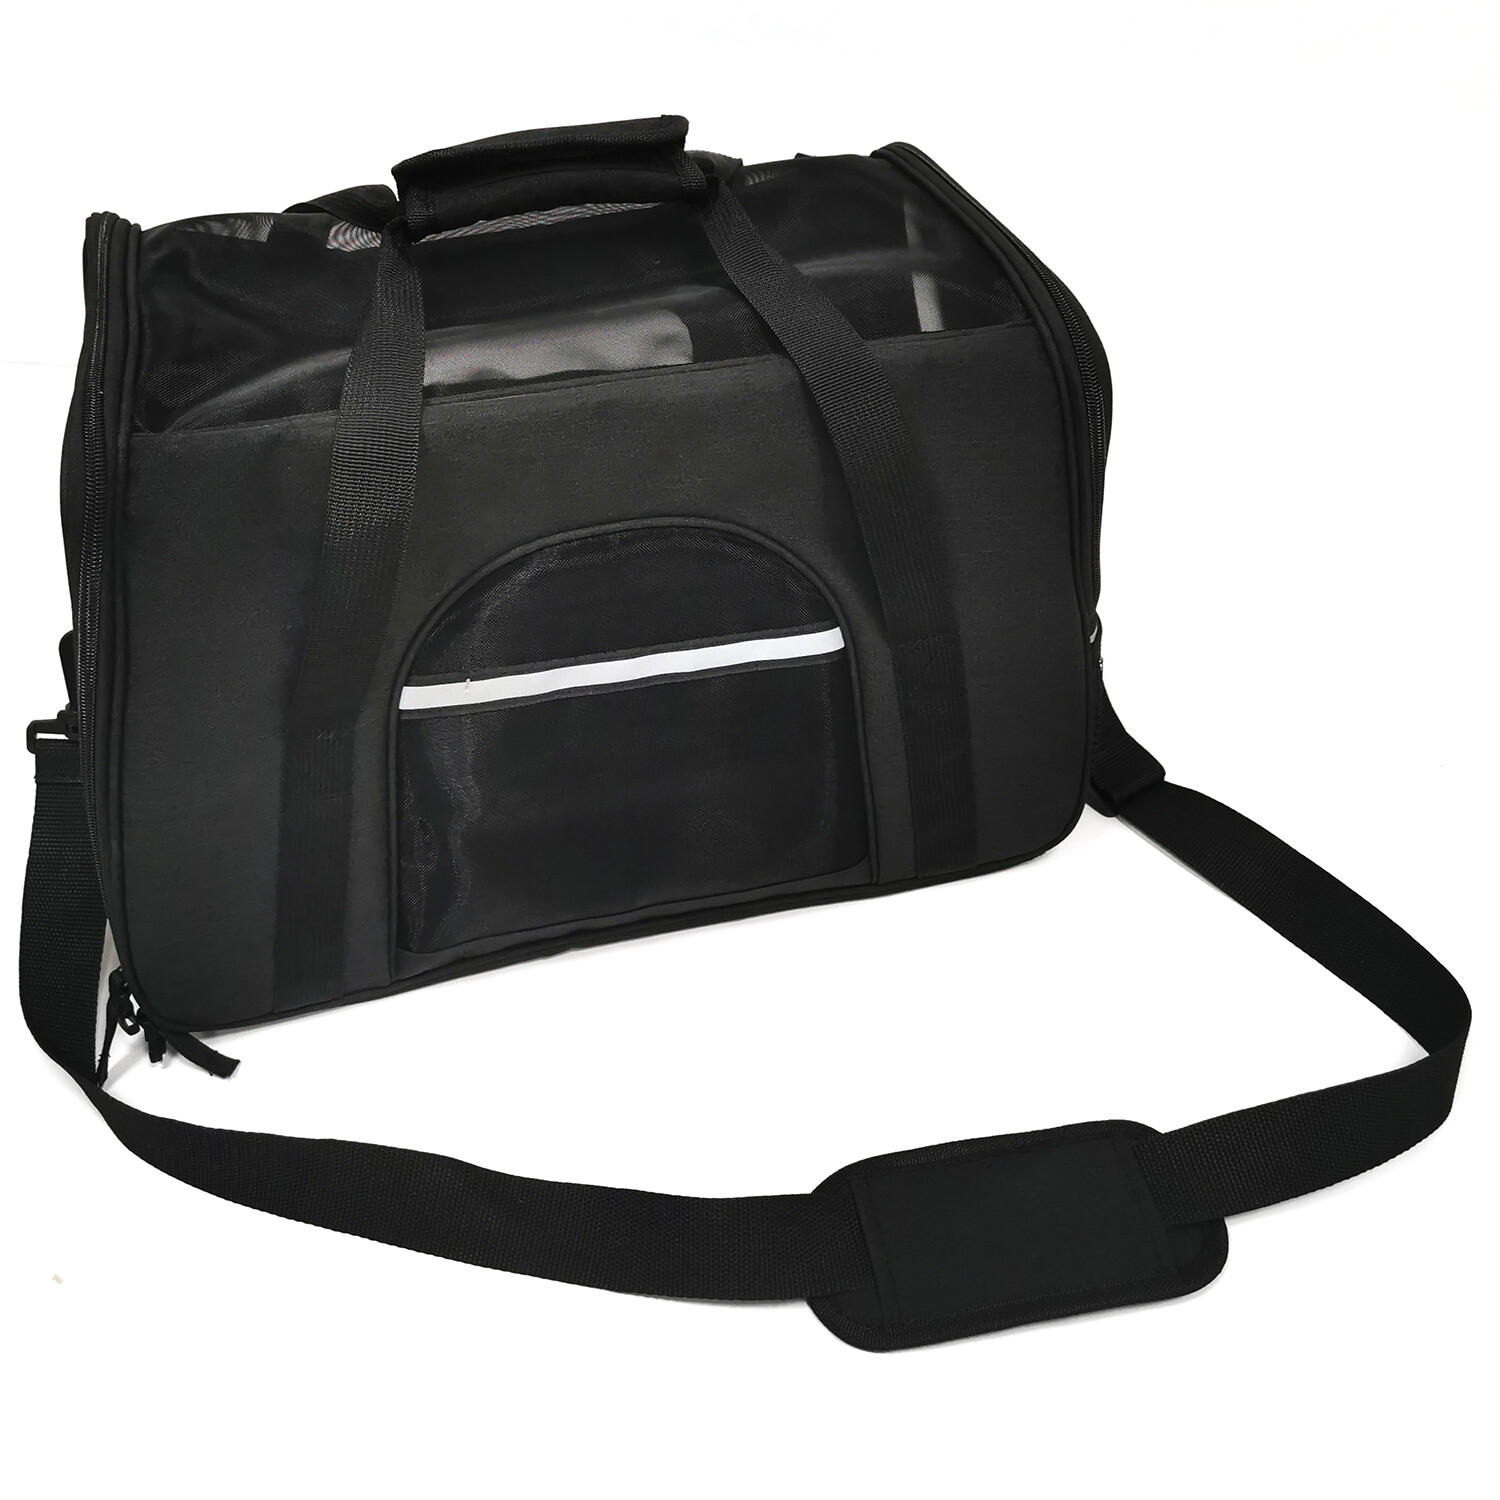 Clever Paws Collapsible Black Pet Carrier Image 1